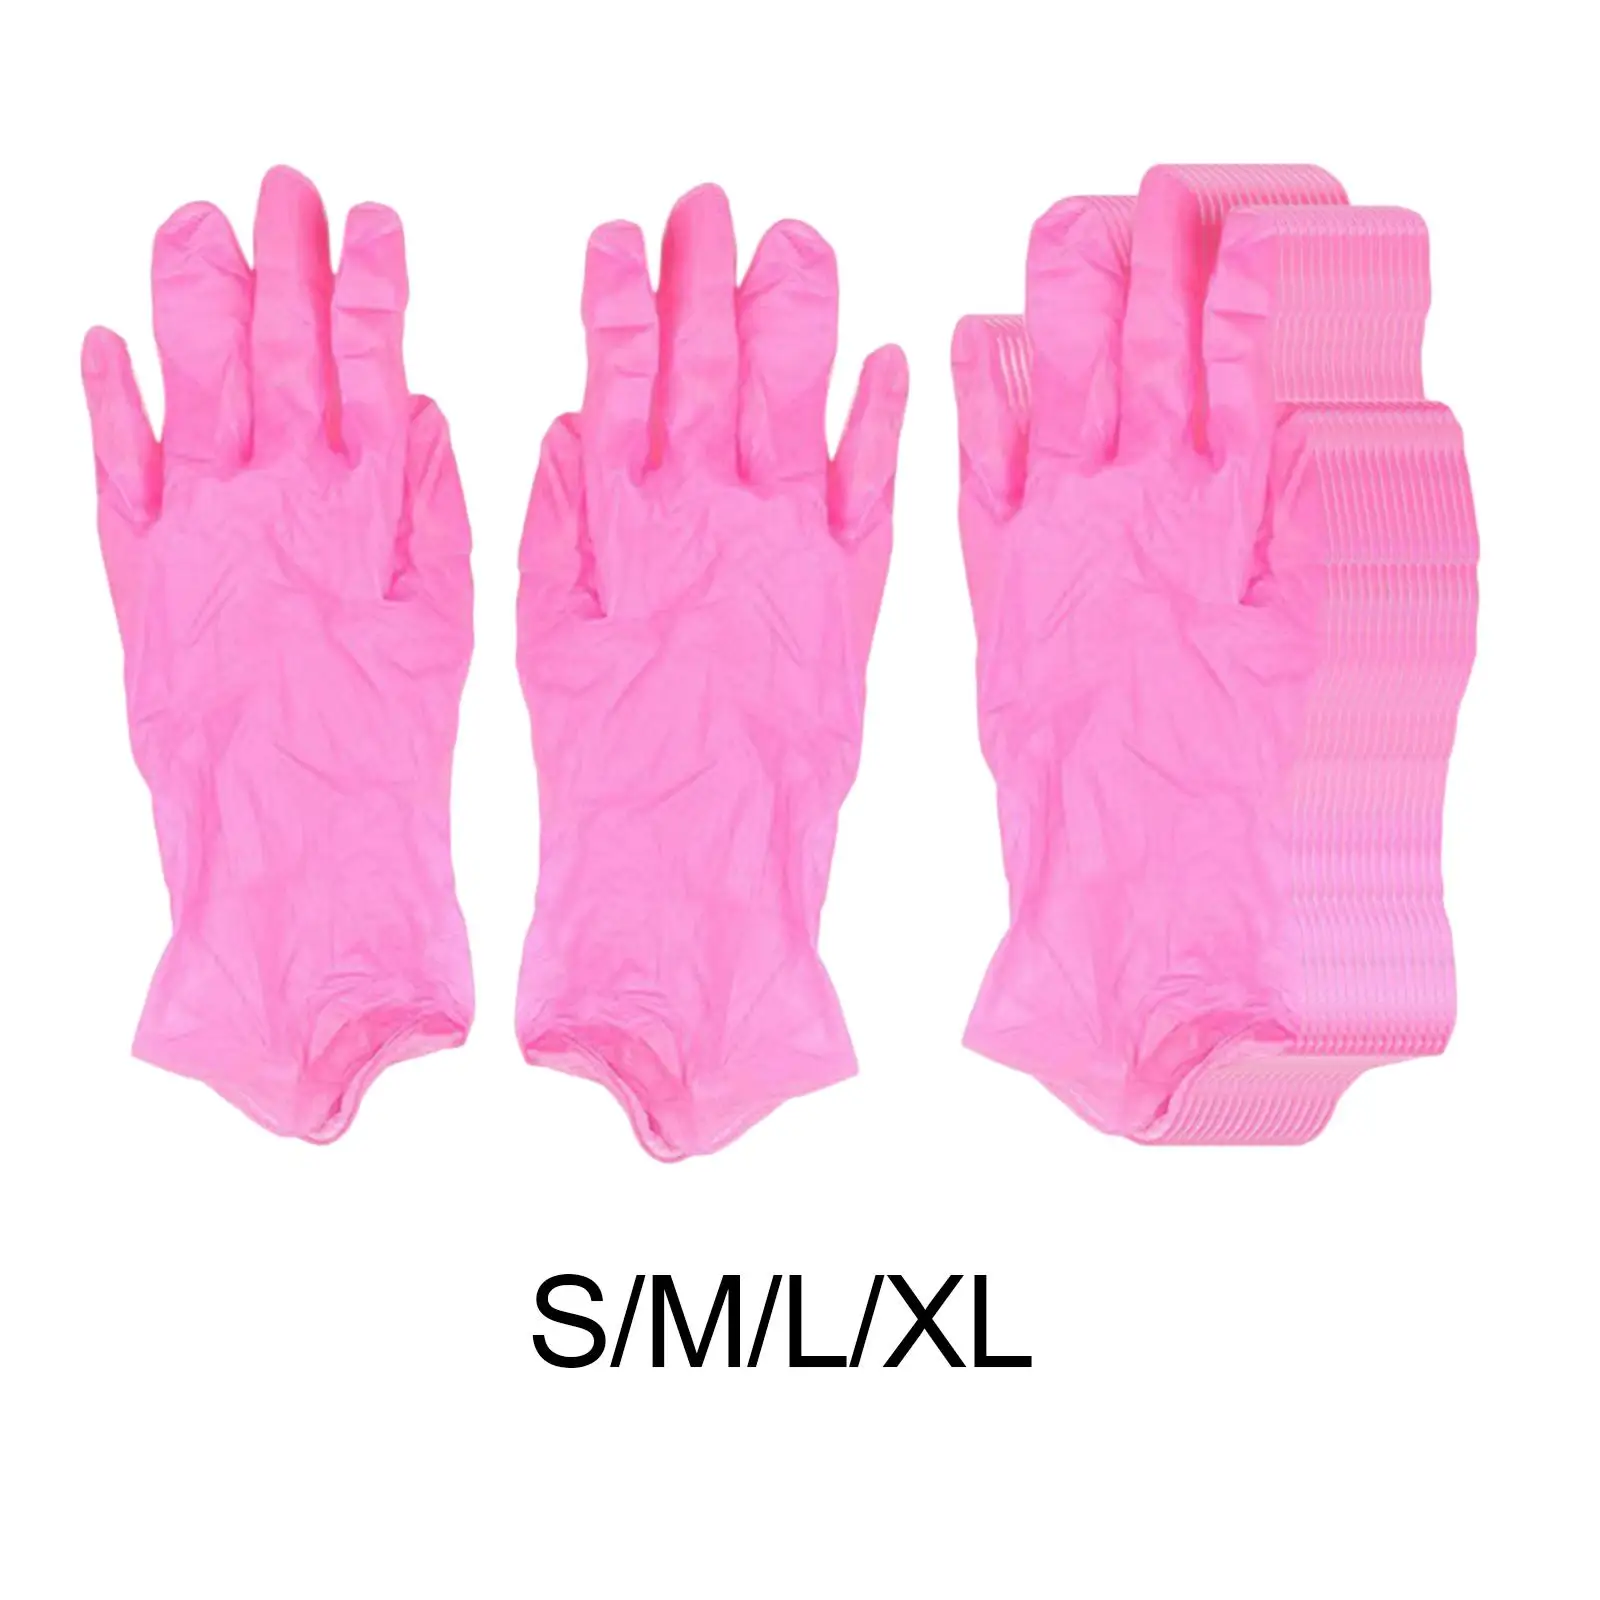 100x Disposable Housework Gloves Latex Free for Industrial Kitchen Caterers